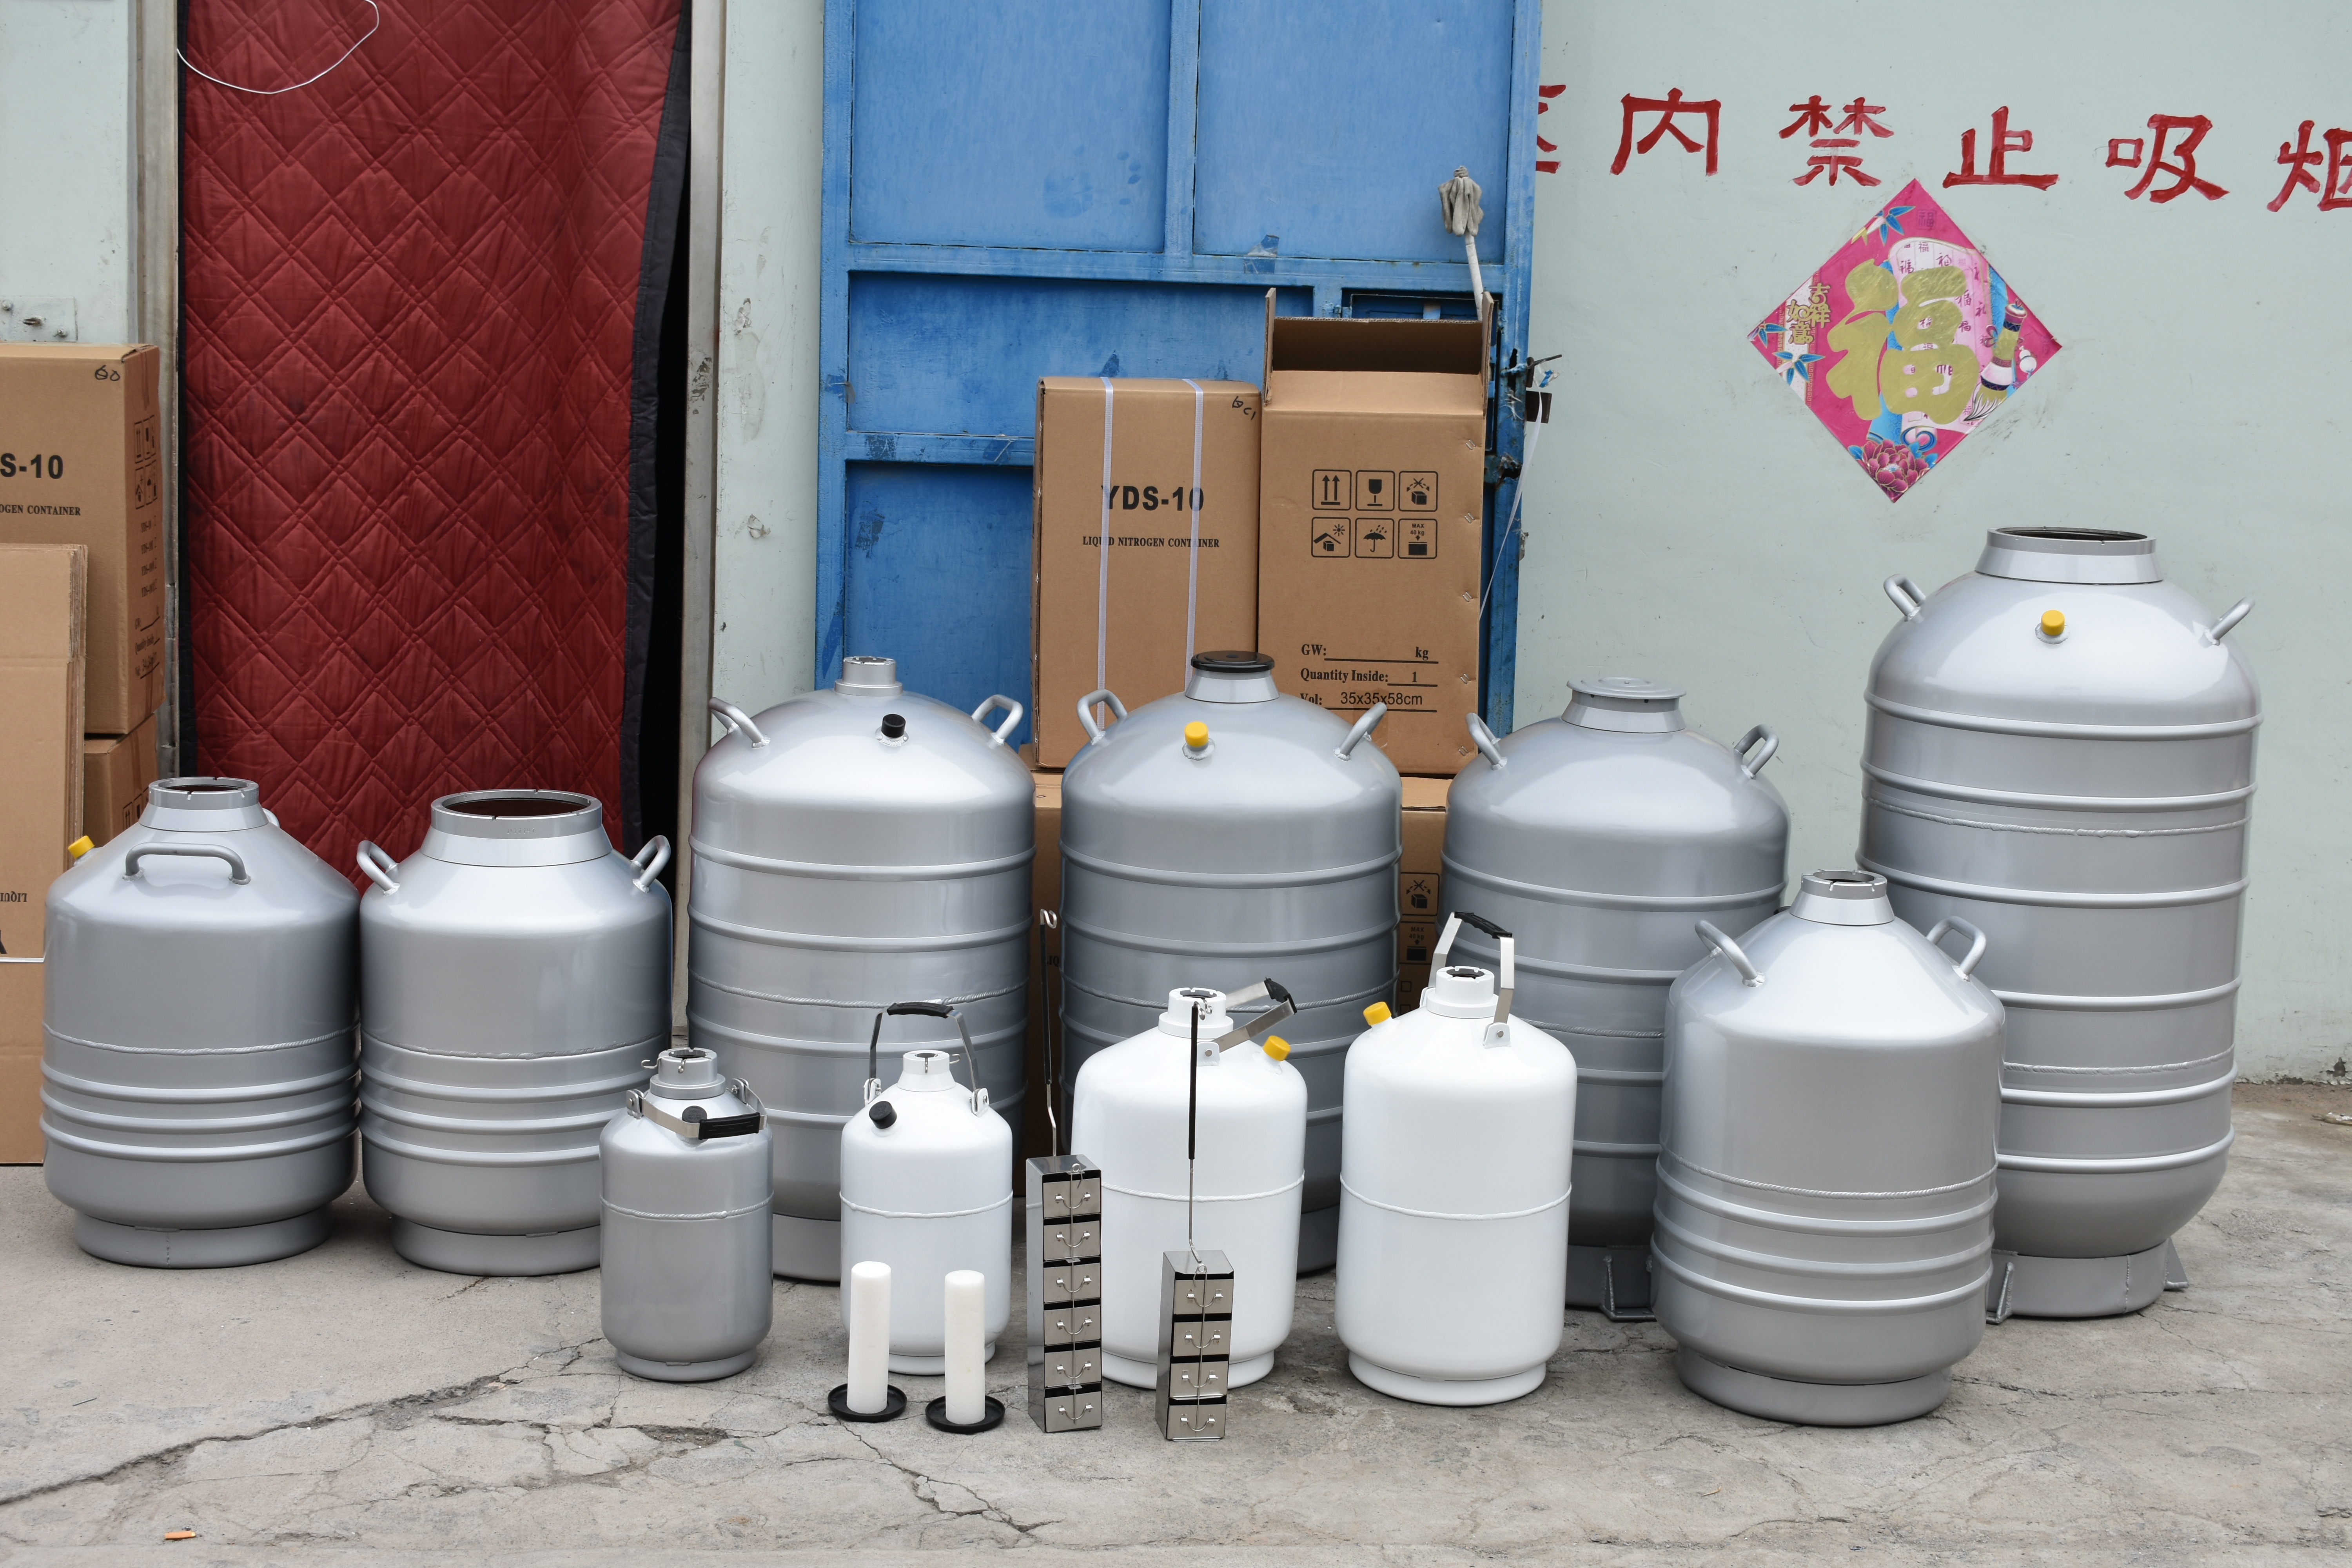 How liquid nitrogen in liquid nitrogen tanks is used in the industry as a cold treatment and refrigerant